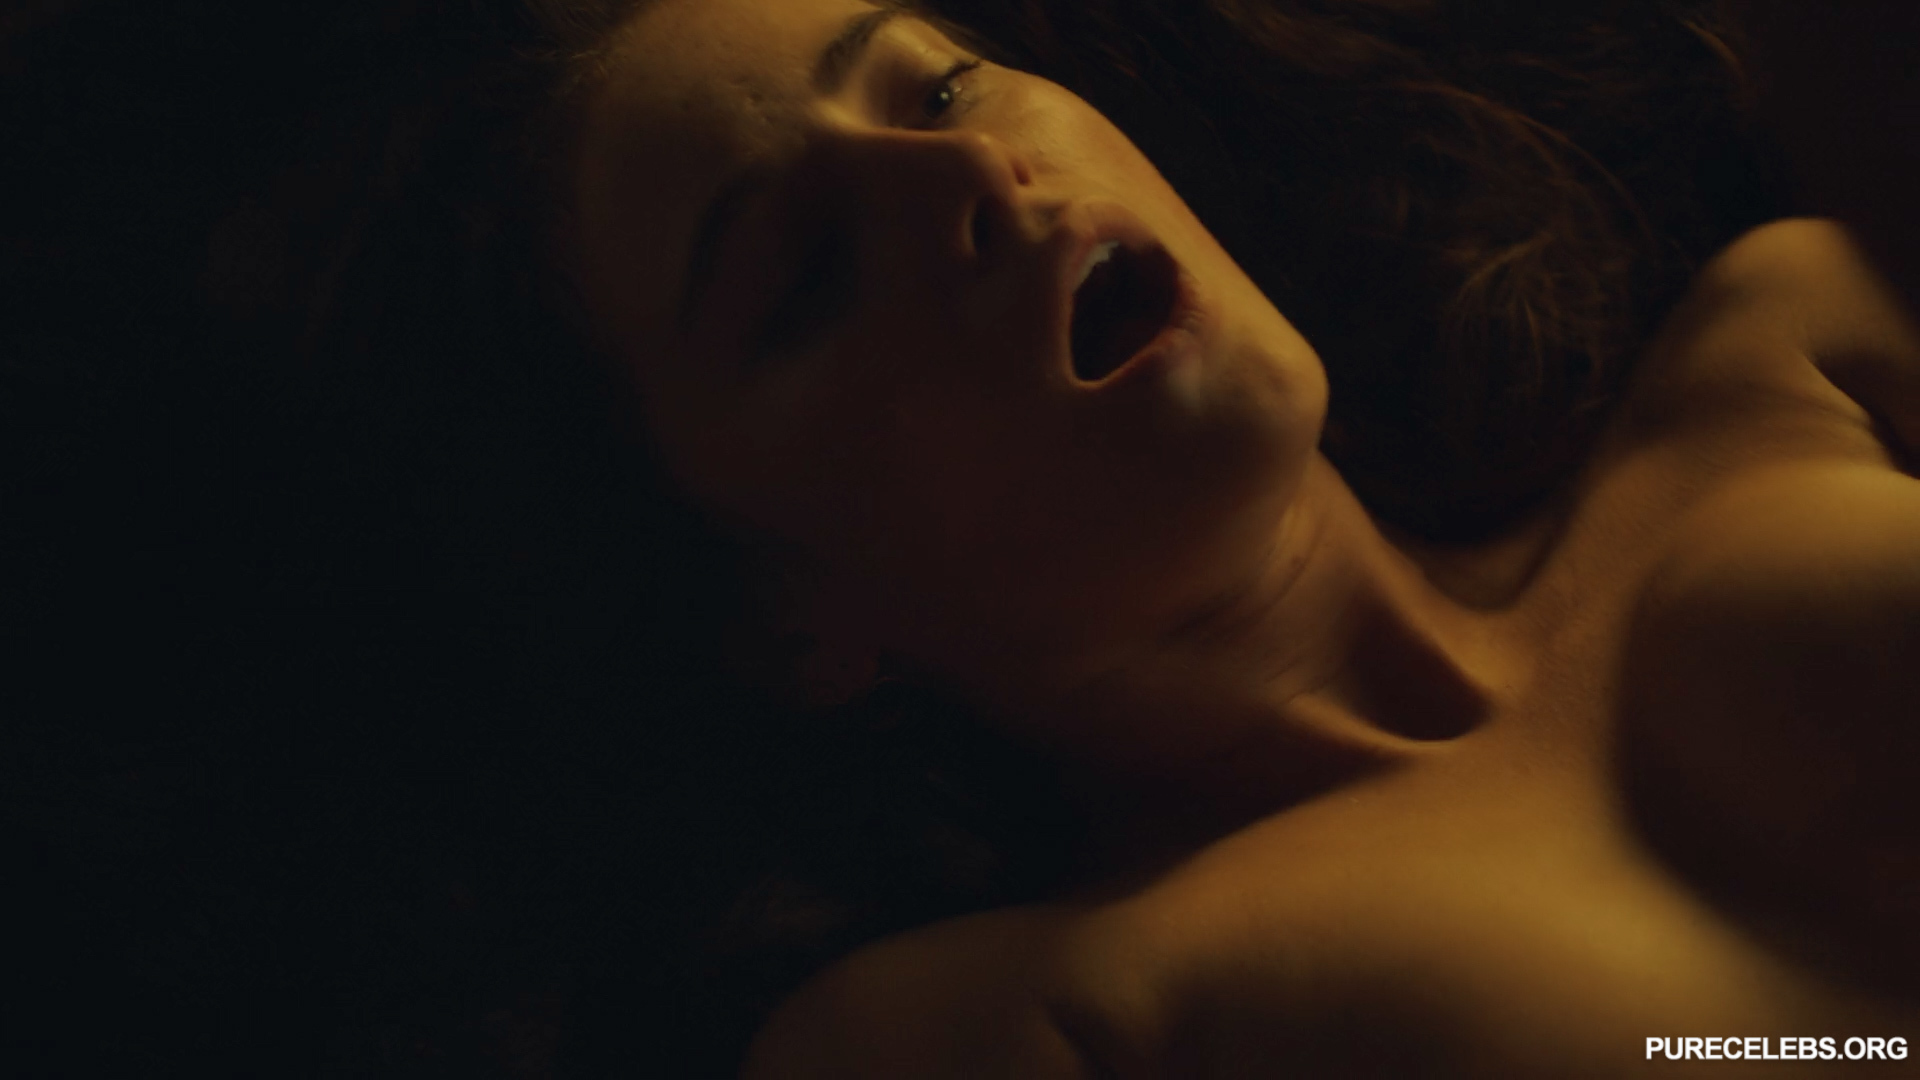 British actress Millie Brady starred in nude and sex scenes in the series T...